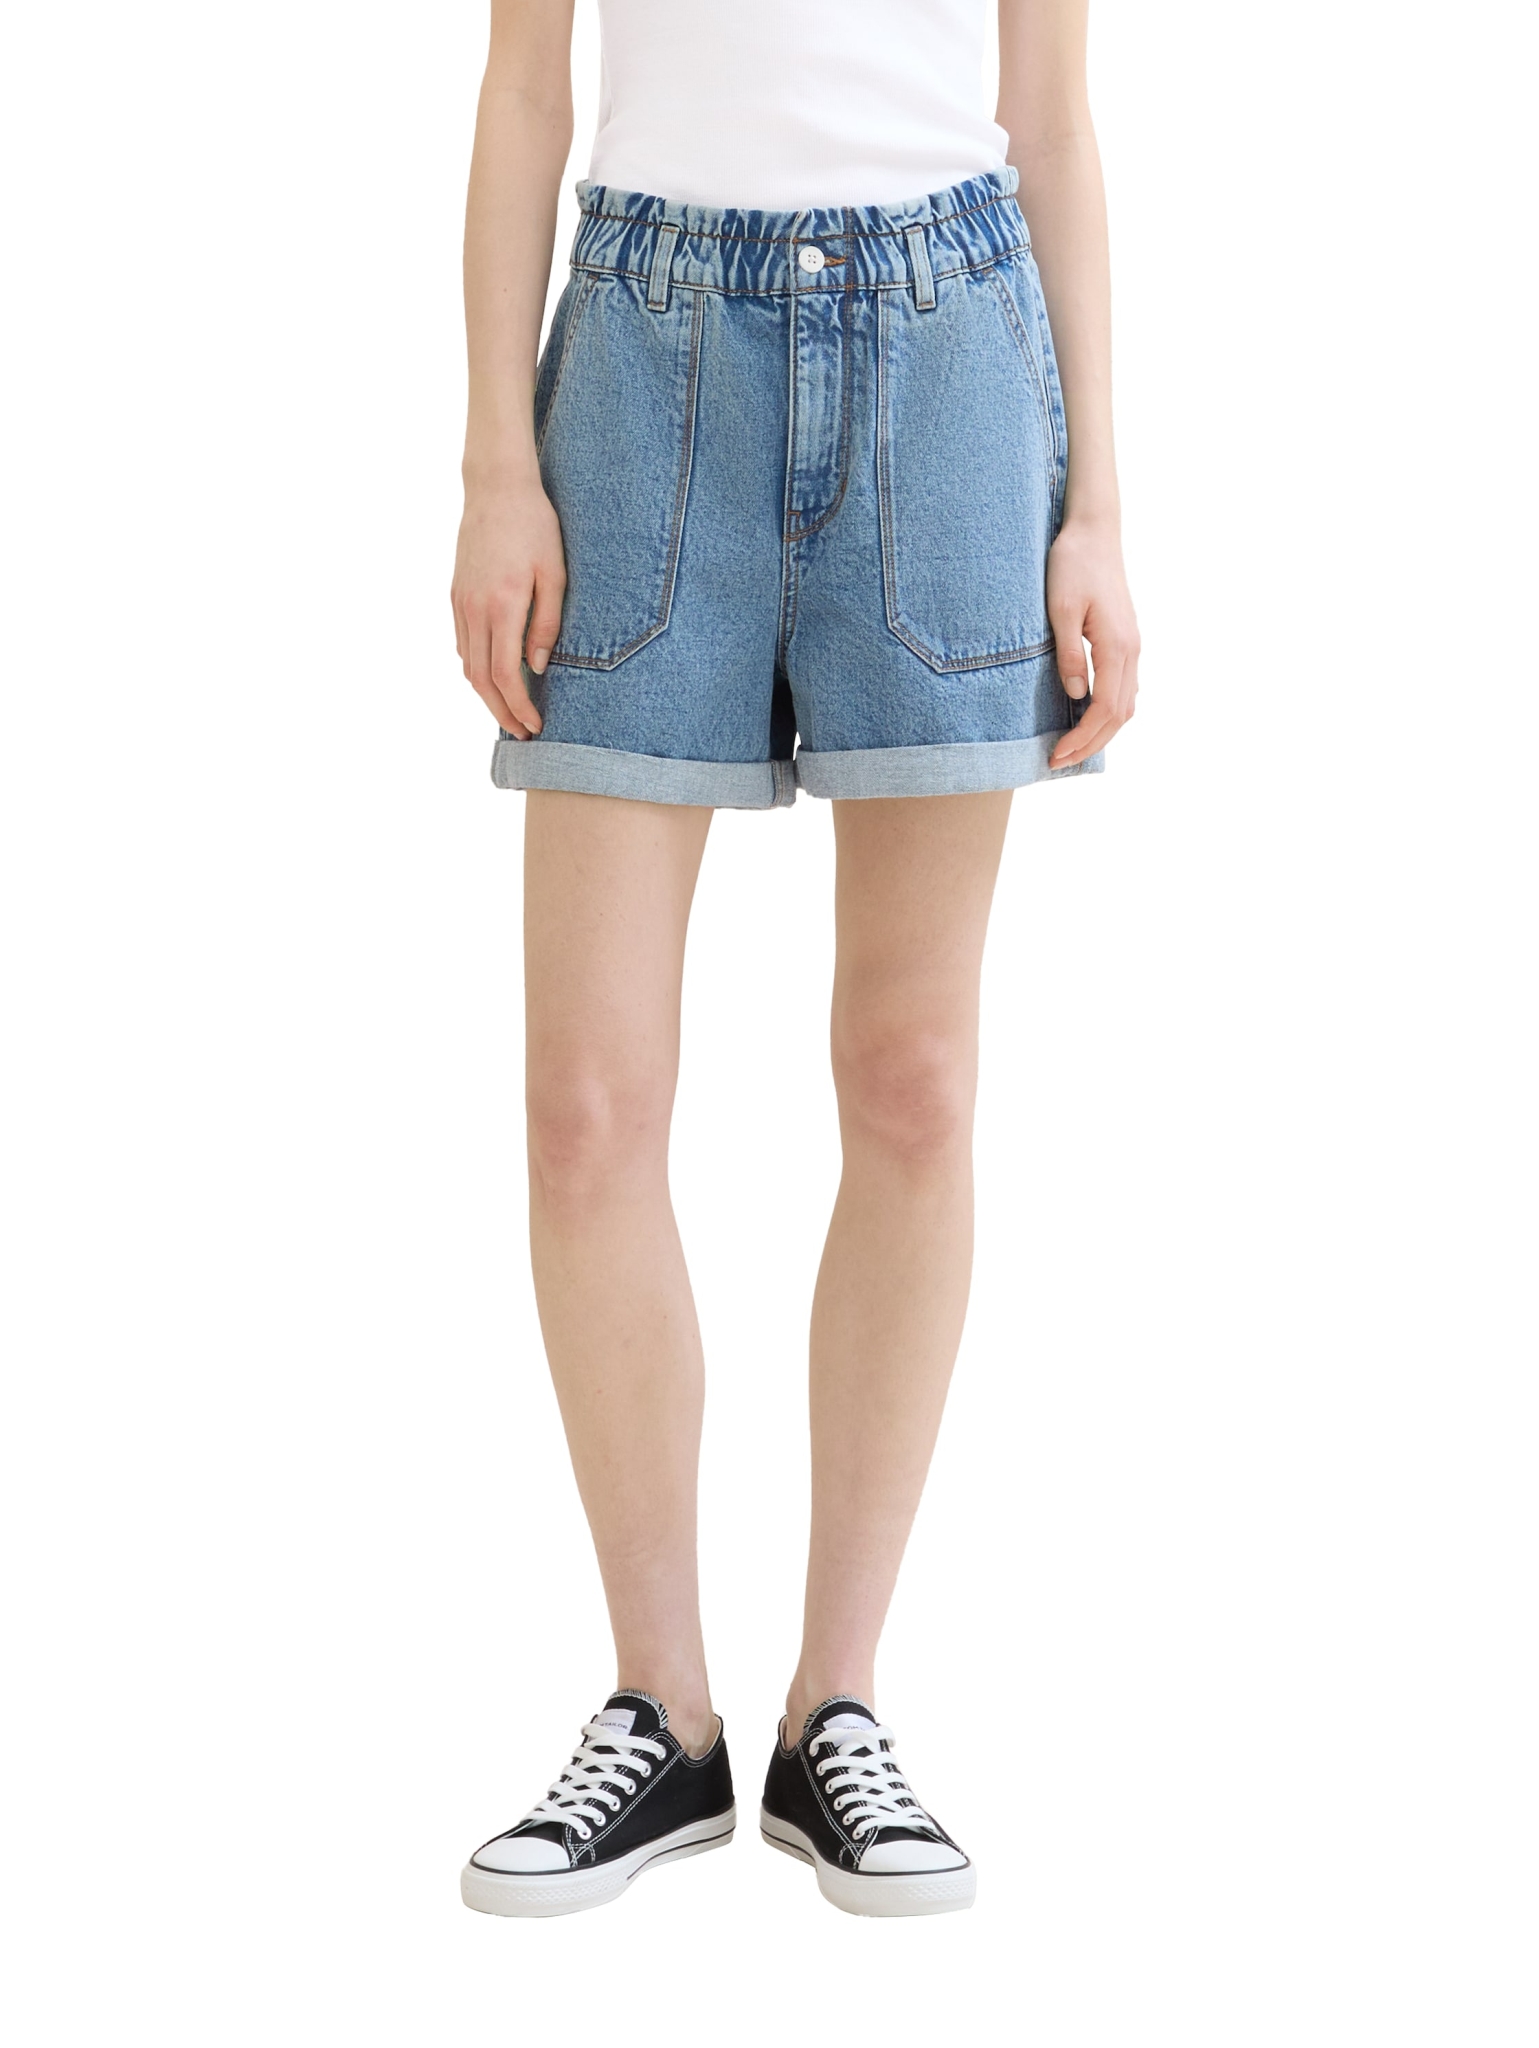 TOM TAILOR DENIM Relaxed Jeans Shorts 10764445